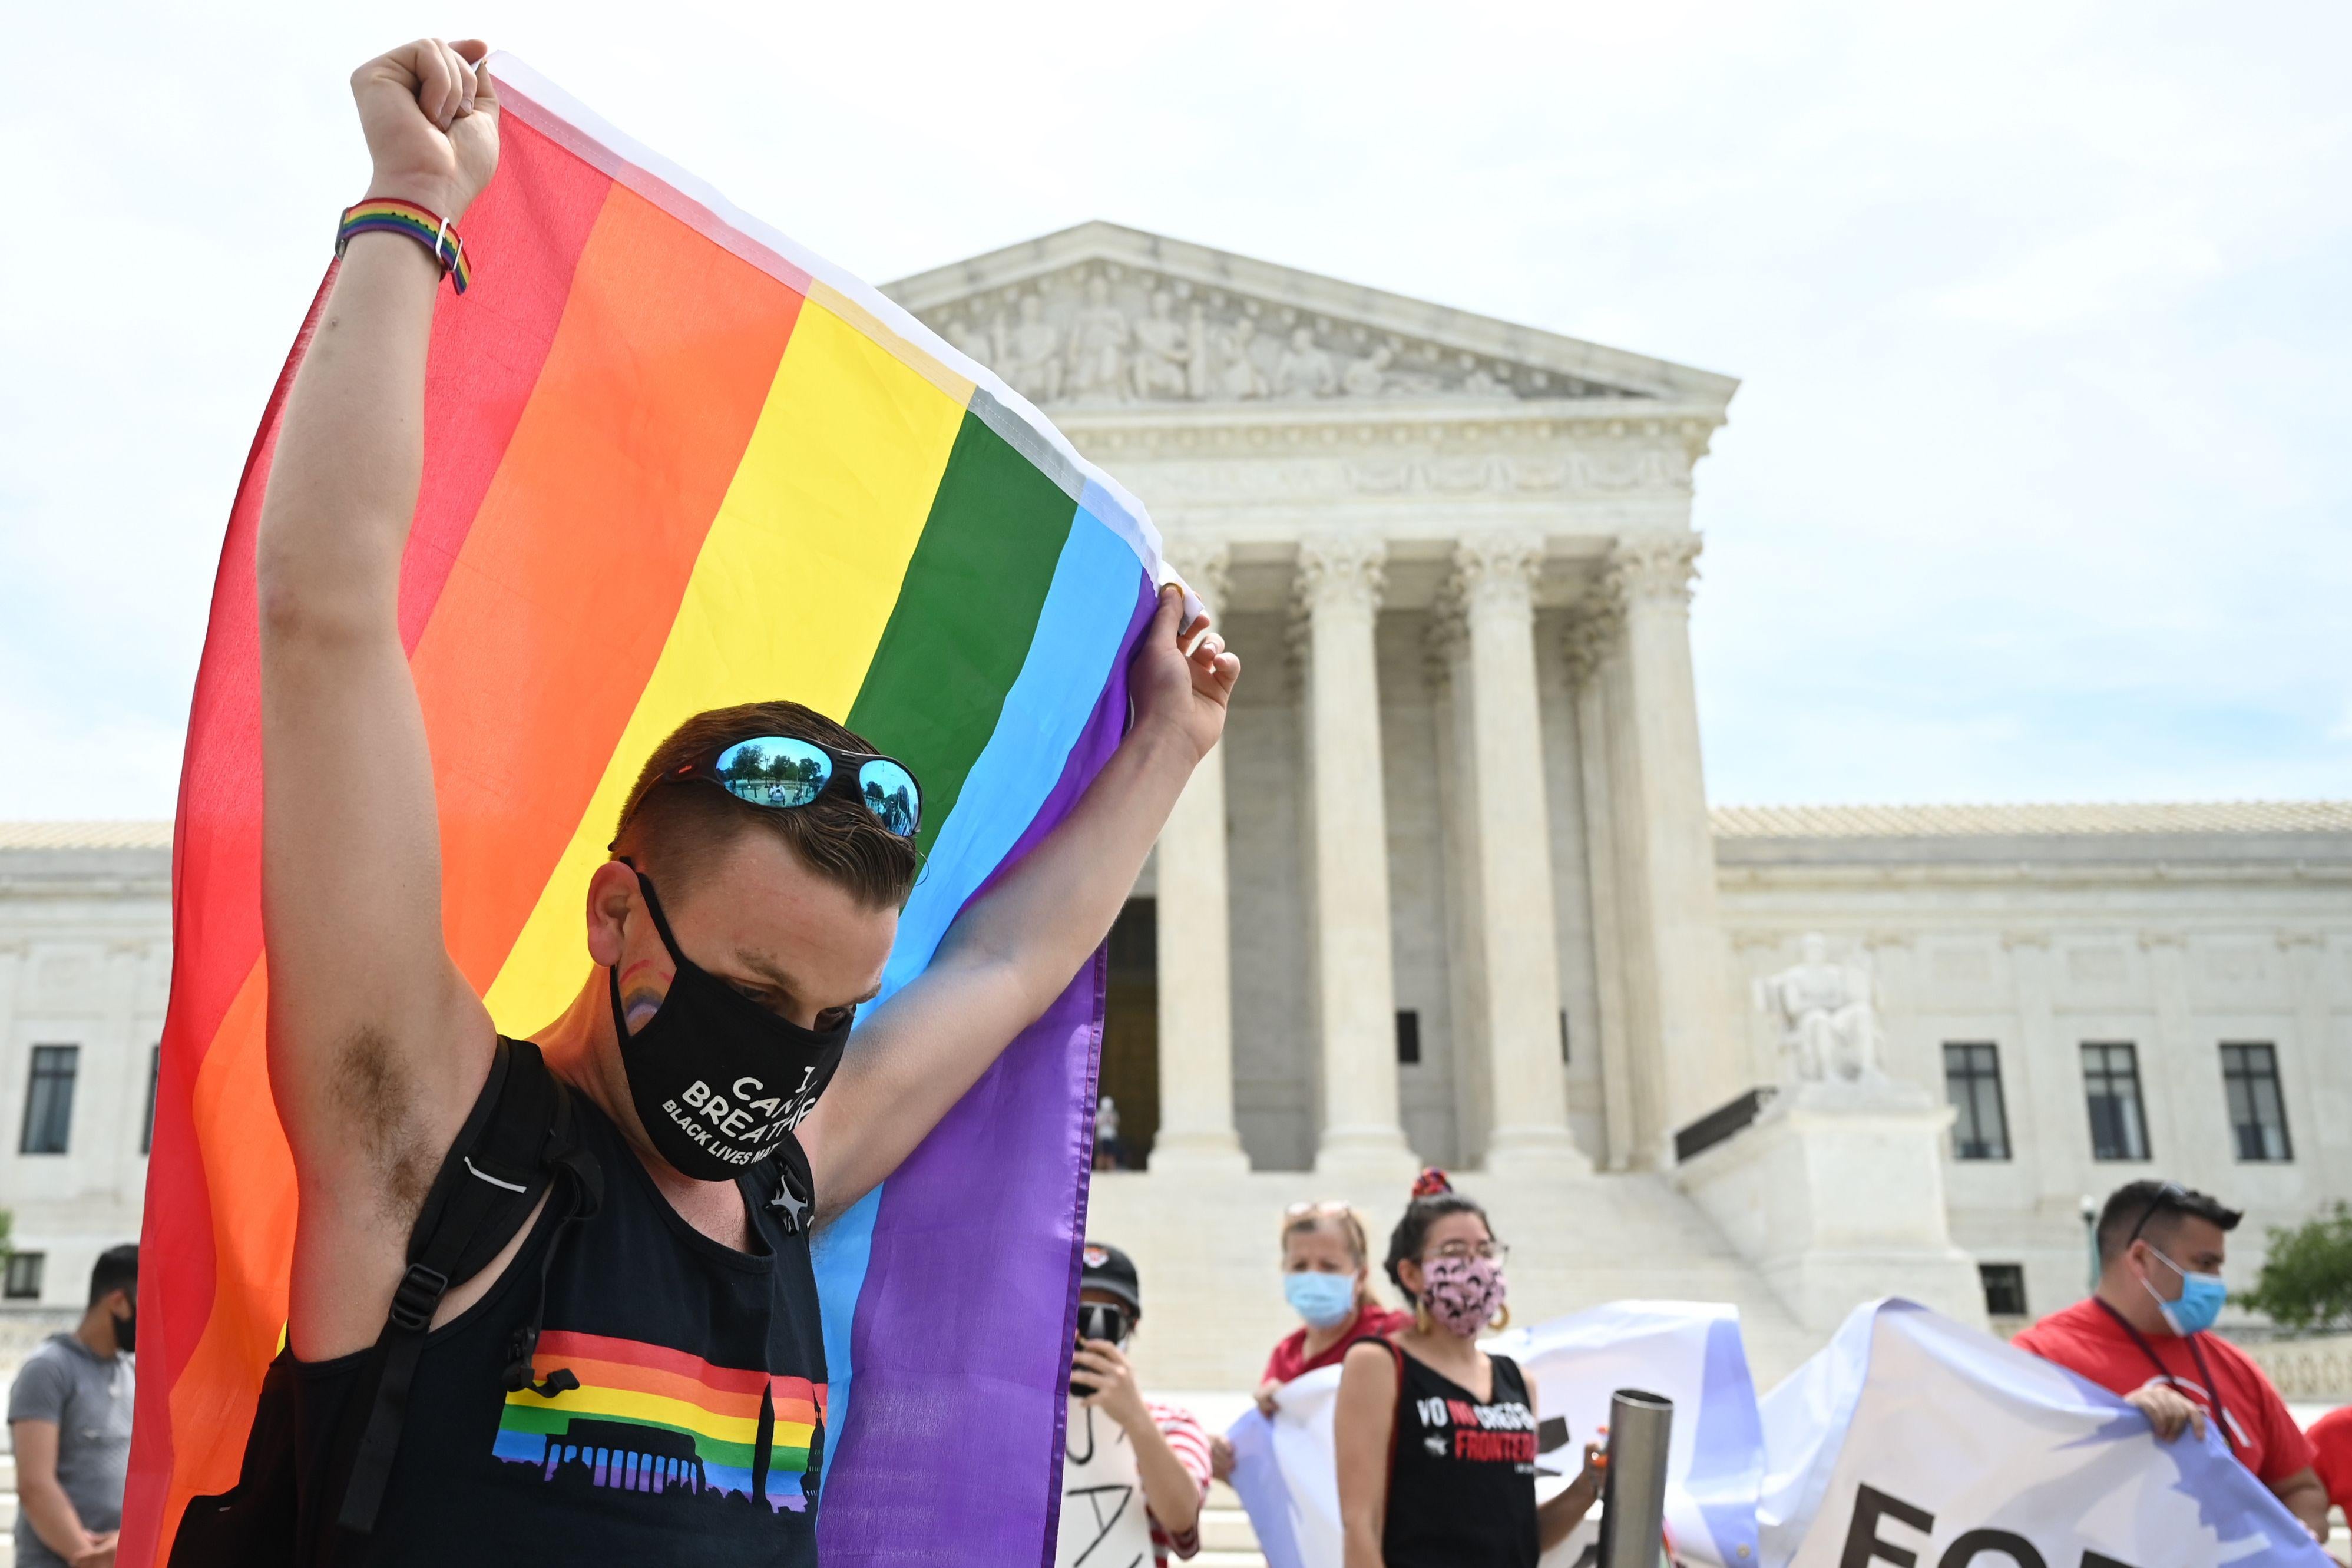 Man wearing a black mask and shirt with sunglasses on his head drapes holds a rainbow flag above his head in front of the Supreme Court.